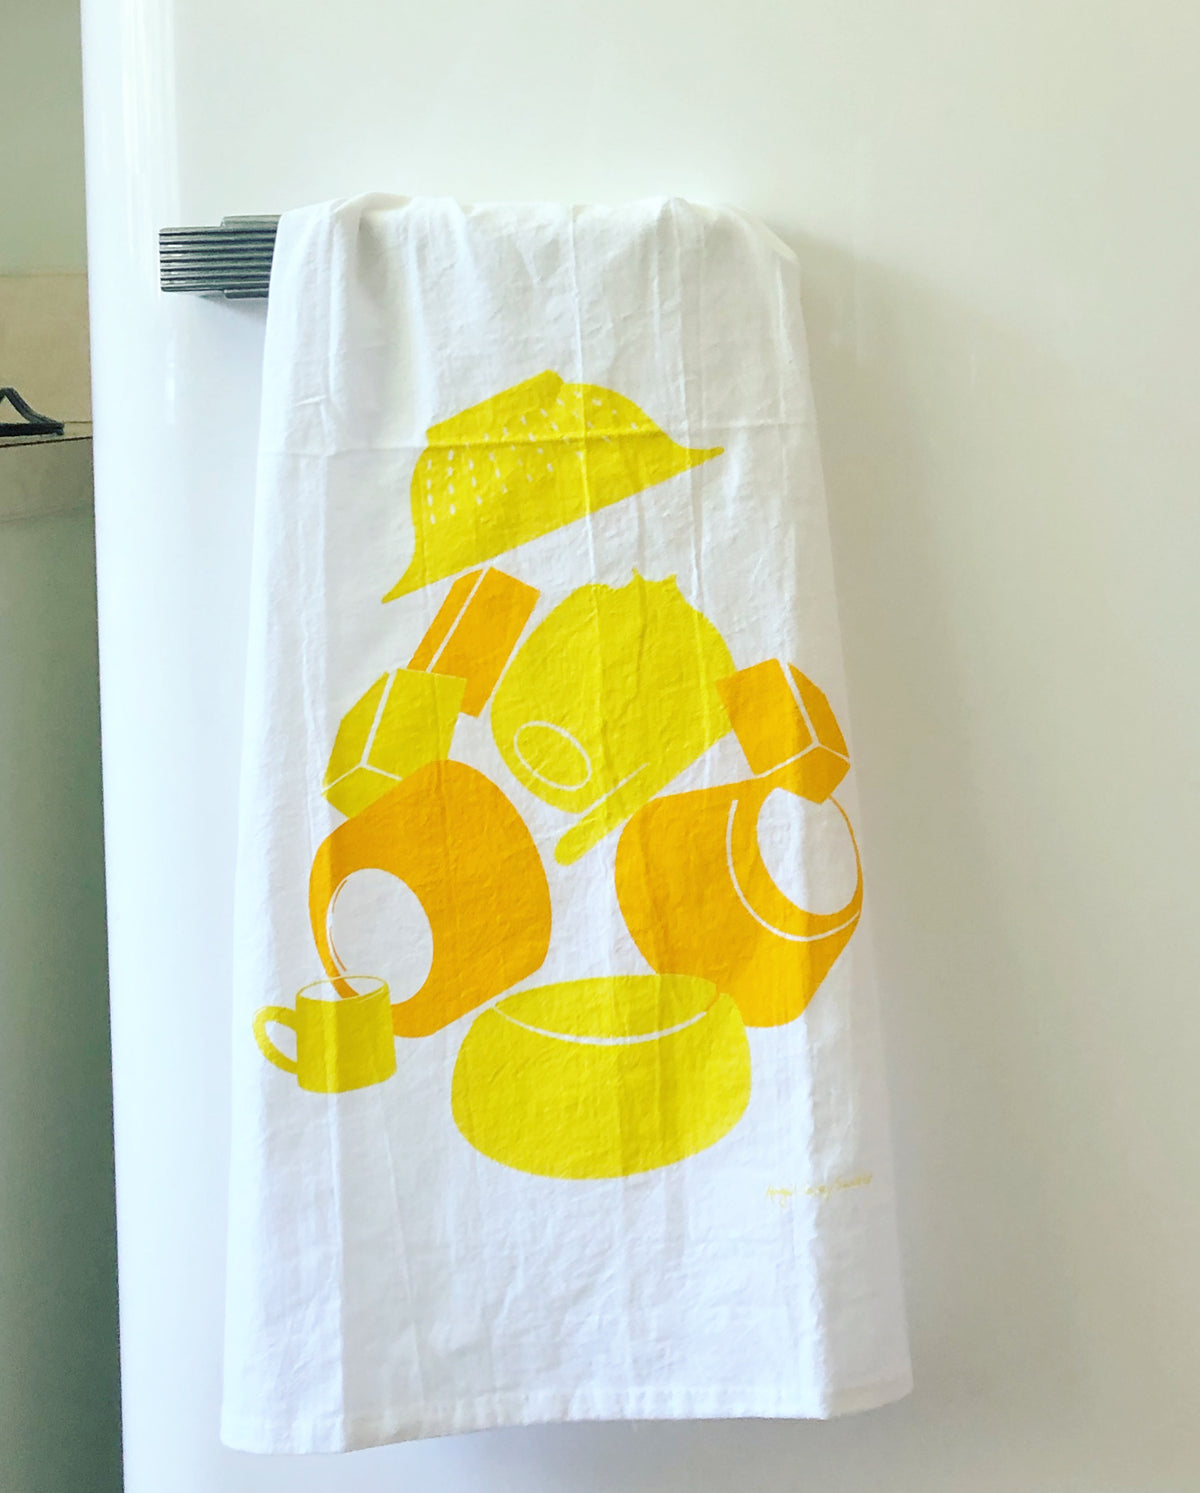 Screen printed tea towel made in the USA by Maine artist Abigail Gray Swartz